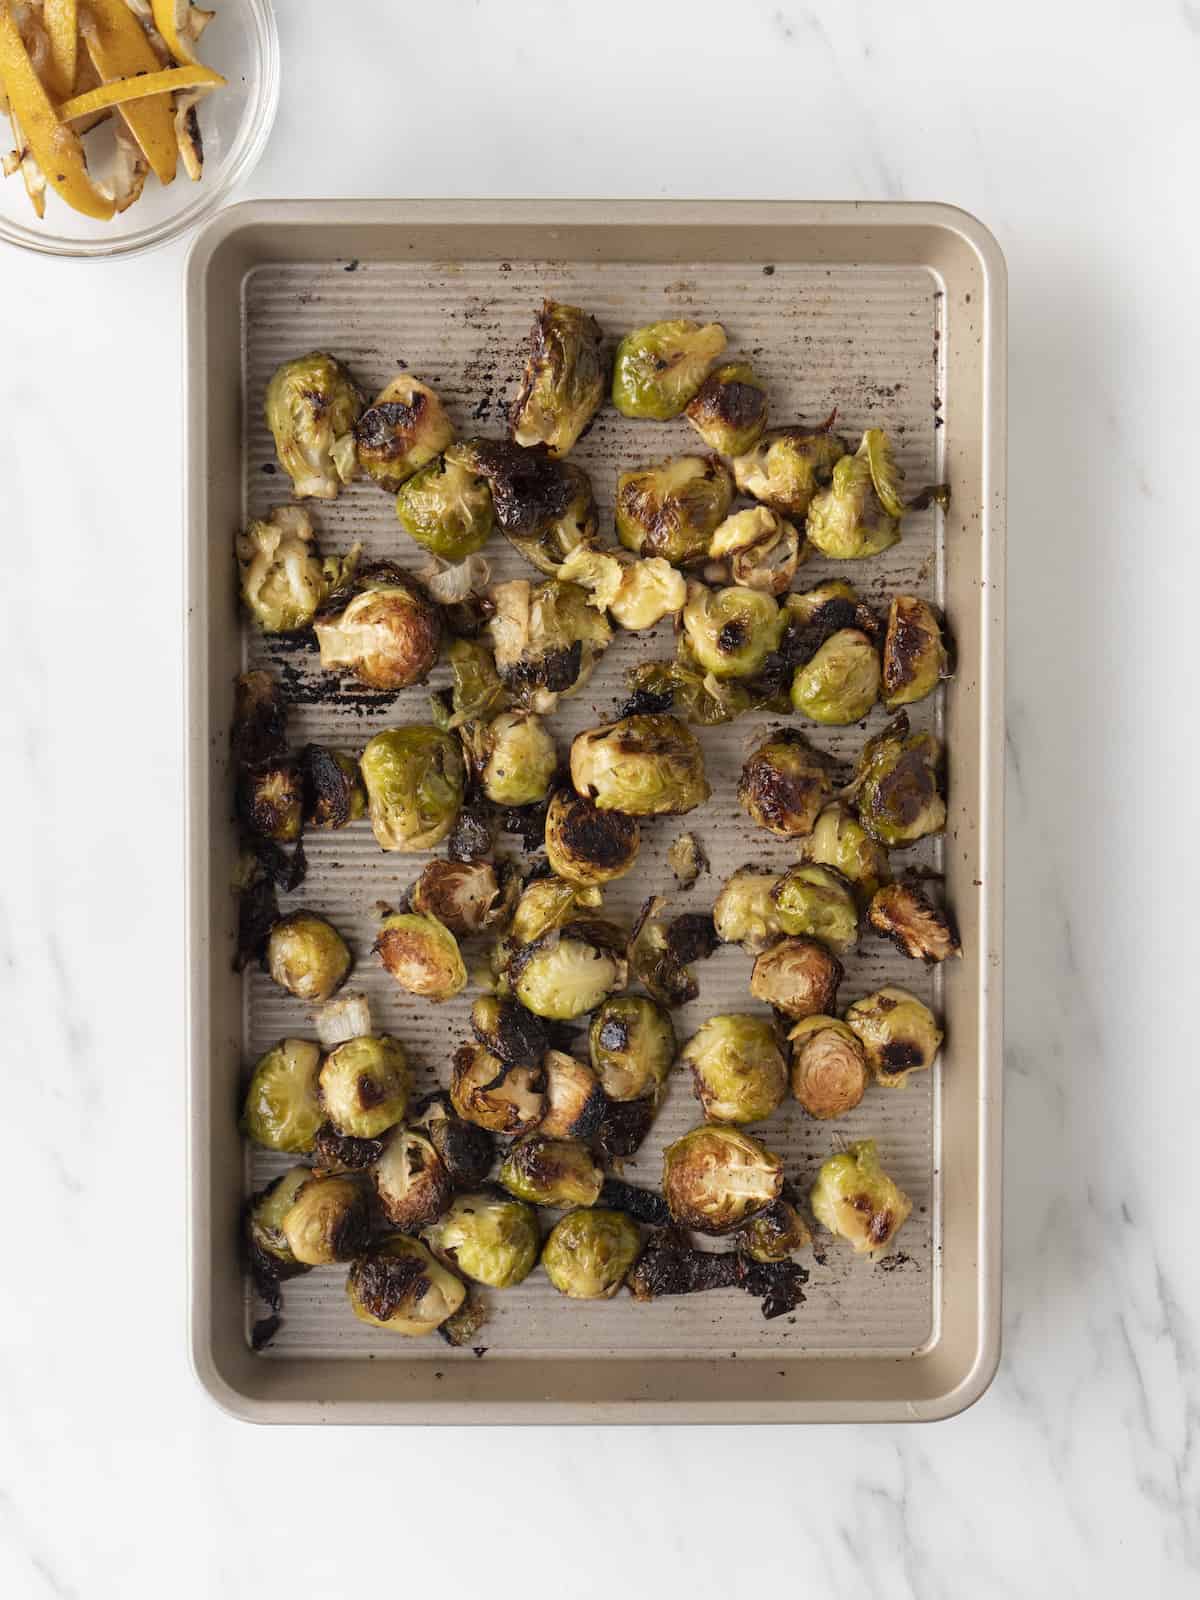 A sheet pan with crispy lemon brussels sprouts and a small mixing bowl of lemon wedges that have been picked out when the dish completed cooking.